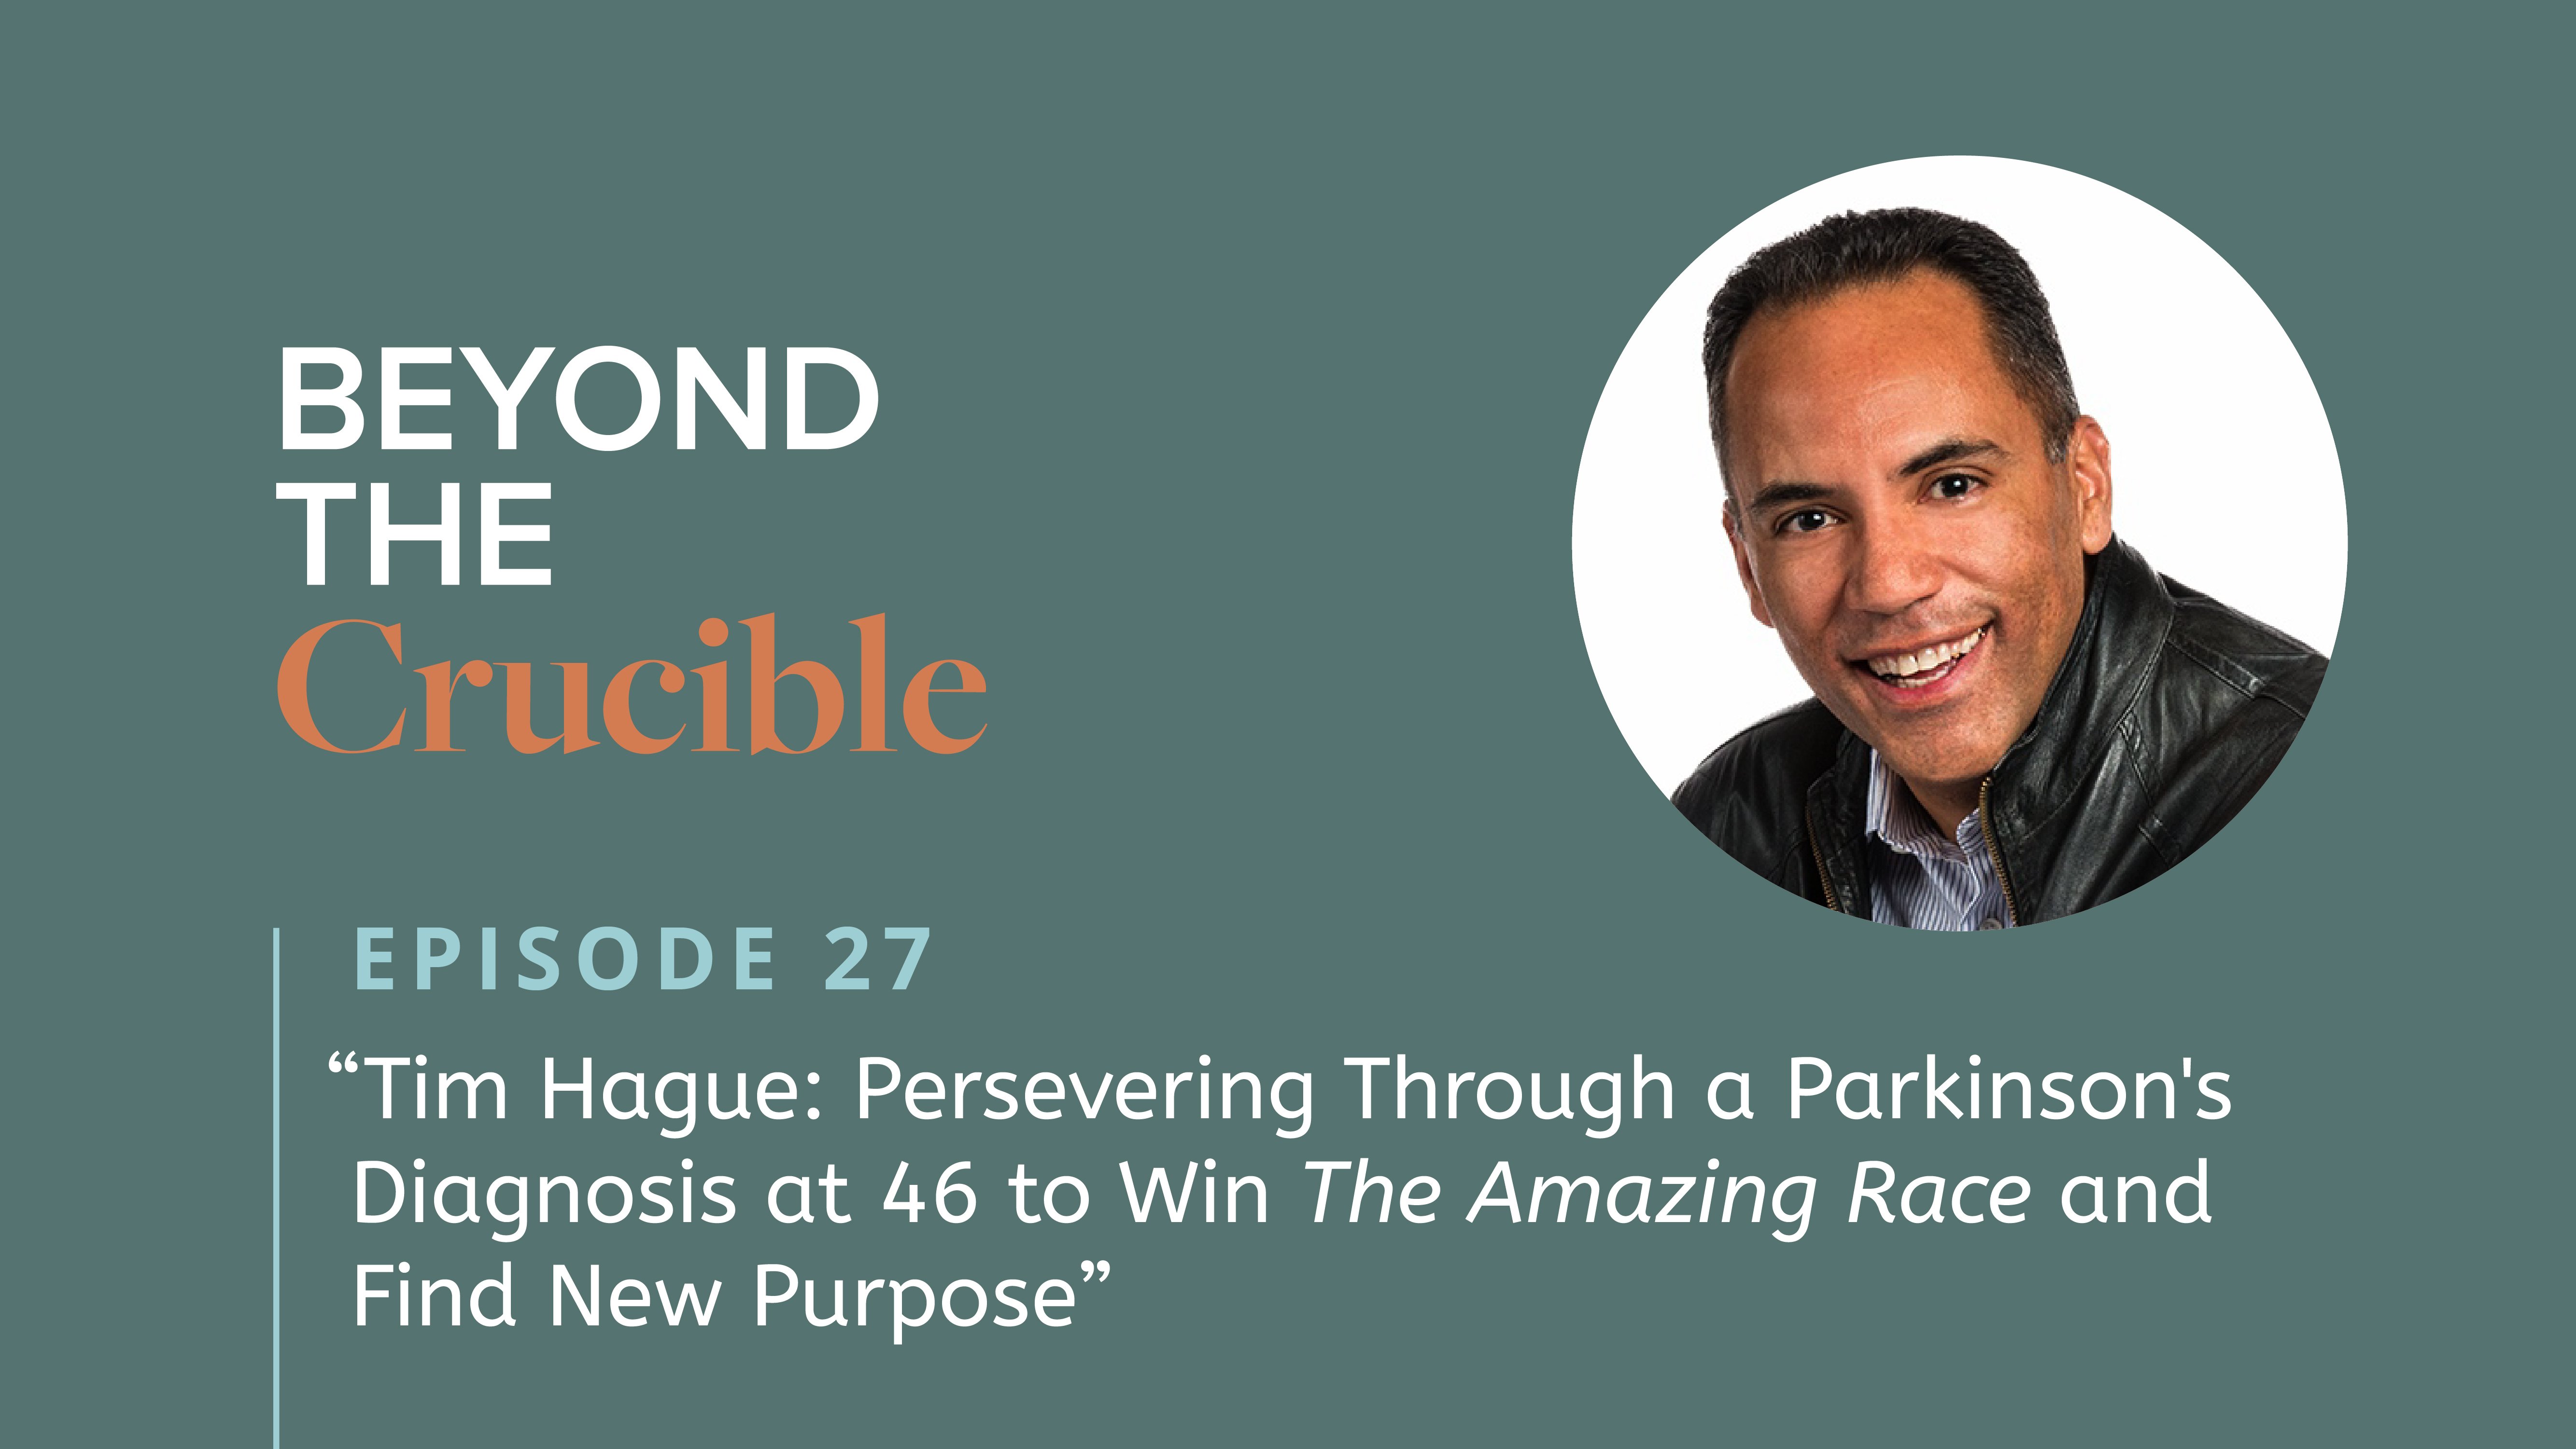 Tim Hague: Persevering Through a Parkinson’s Diagnosis at 46 to Win The Amazing Race and Find New Purpose #27